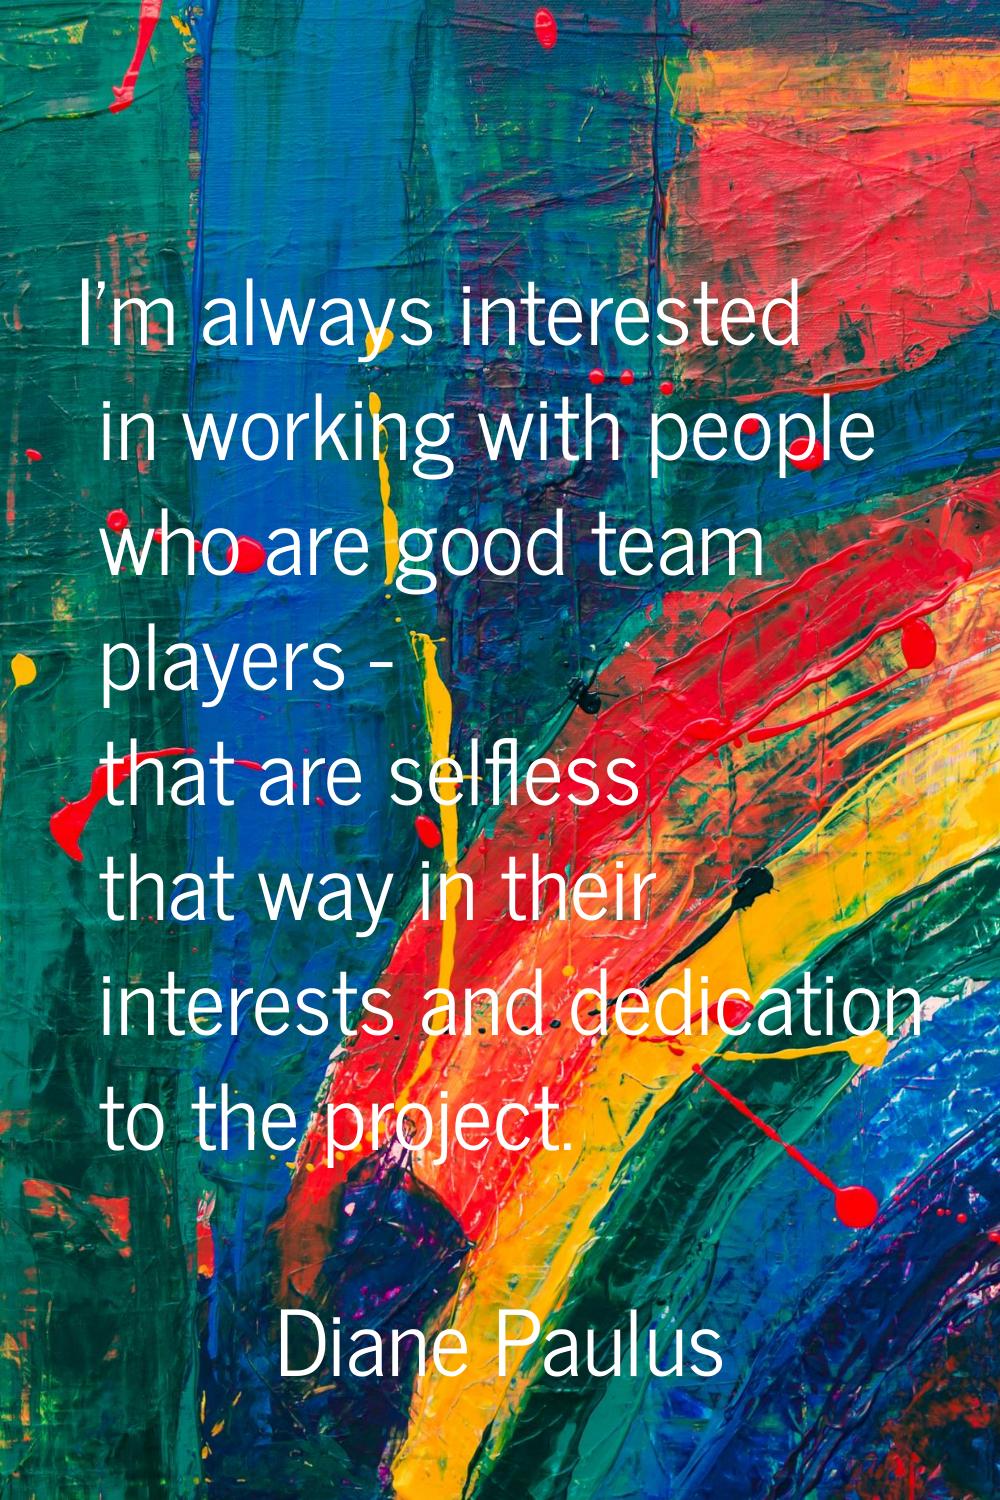 I'm always interested in working with people who are good team players - that are selfless that way